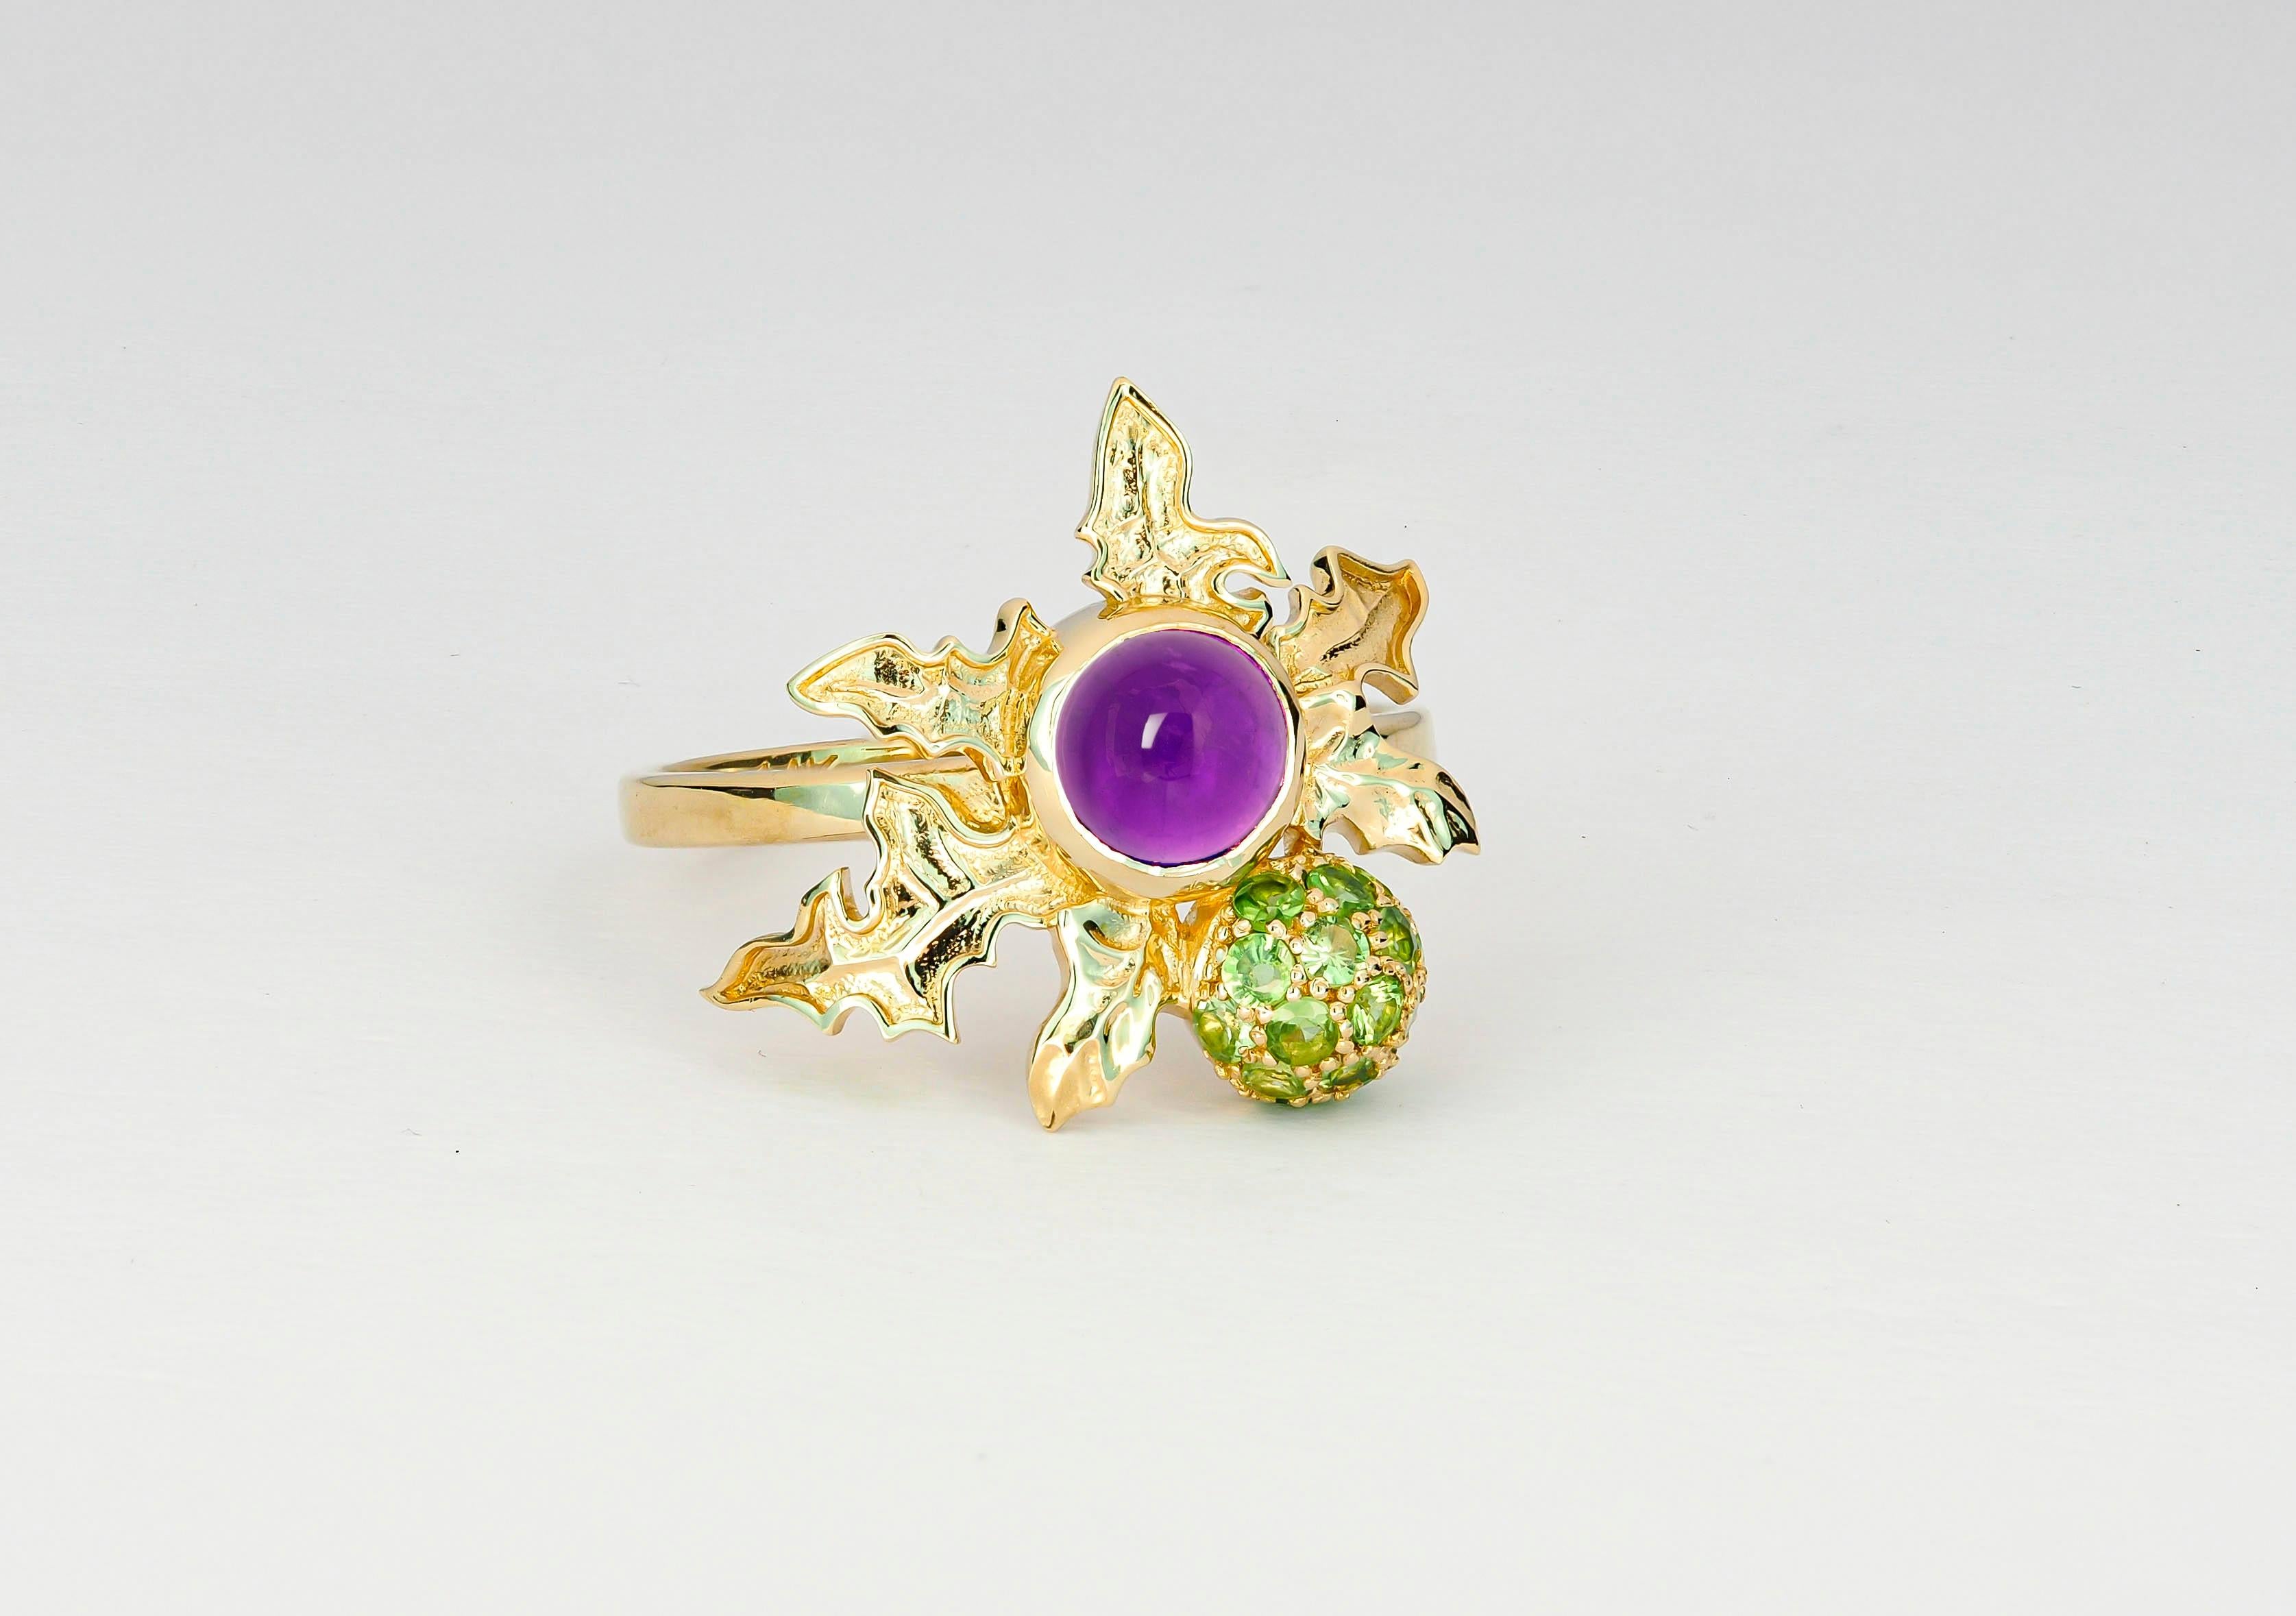 Cabochon 14 K Gold Scottish Thistle Ring with Amethyst and Peridots